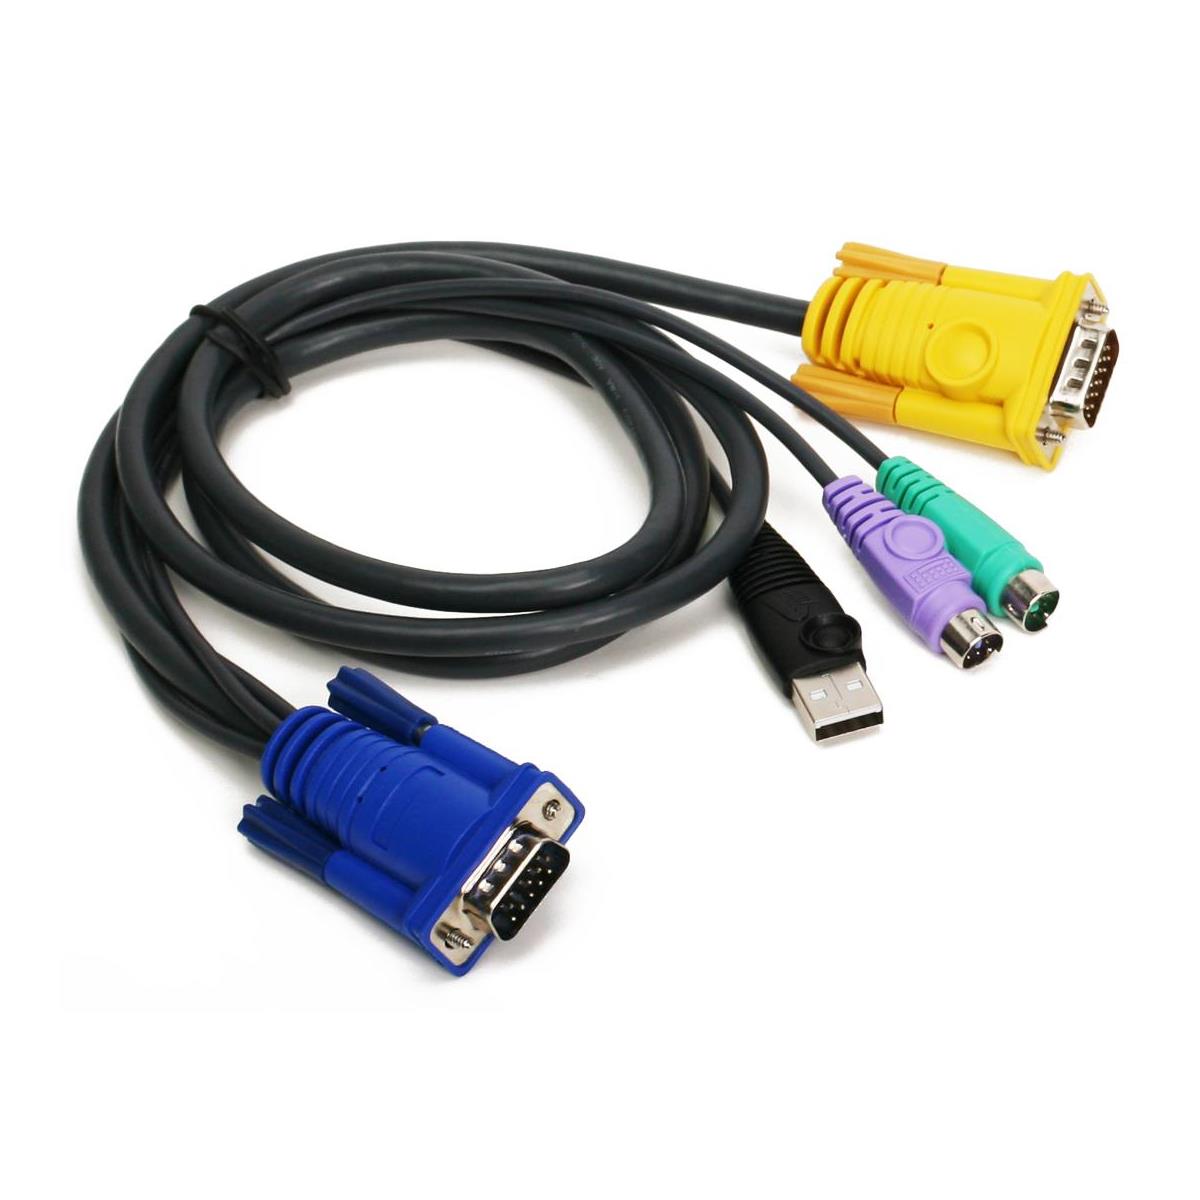 

IOGEAR G2L5302UP 6' PS/2-USB Cable for GCS1722 and GCS1724 KVM Switches